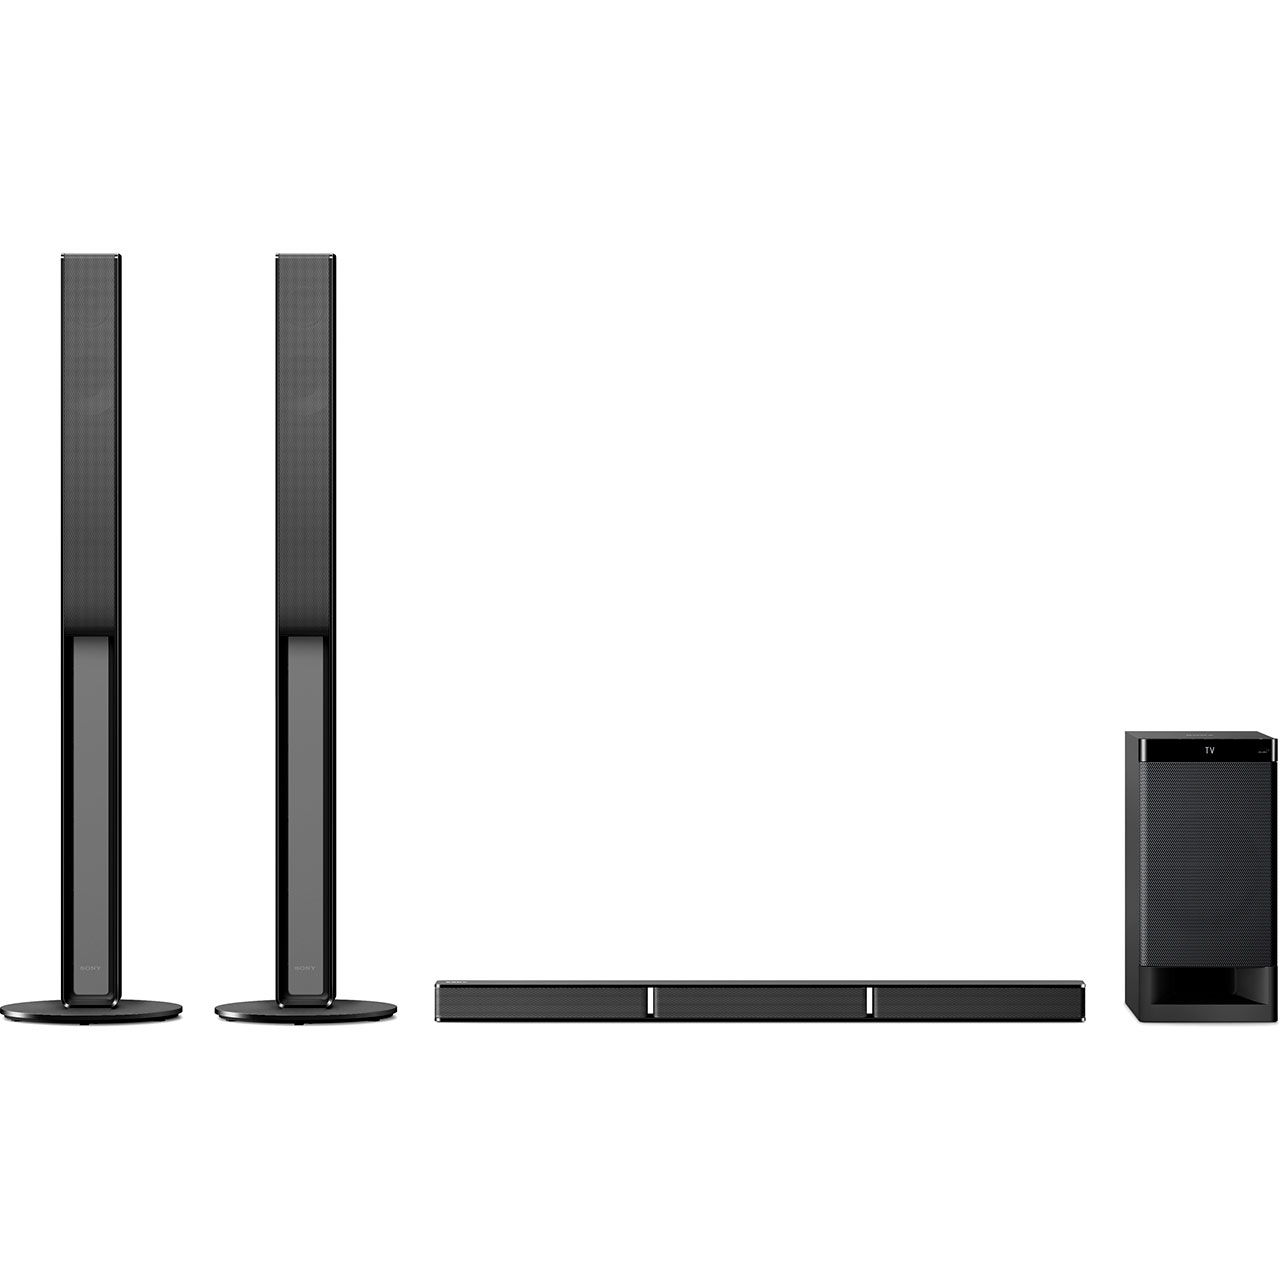 Sony HT-RT4 5.1 Surround Home Cinema System Review